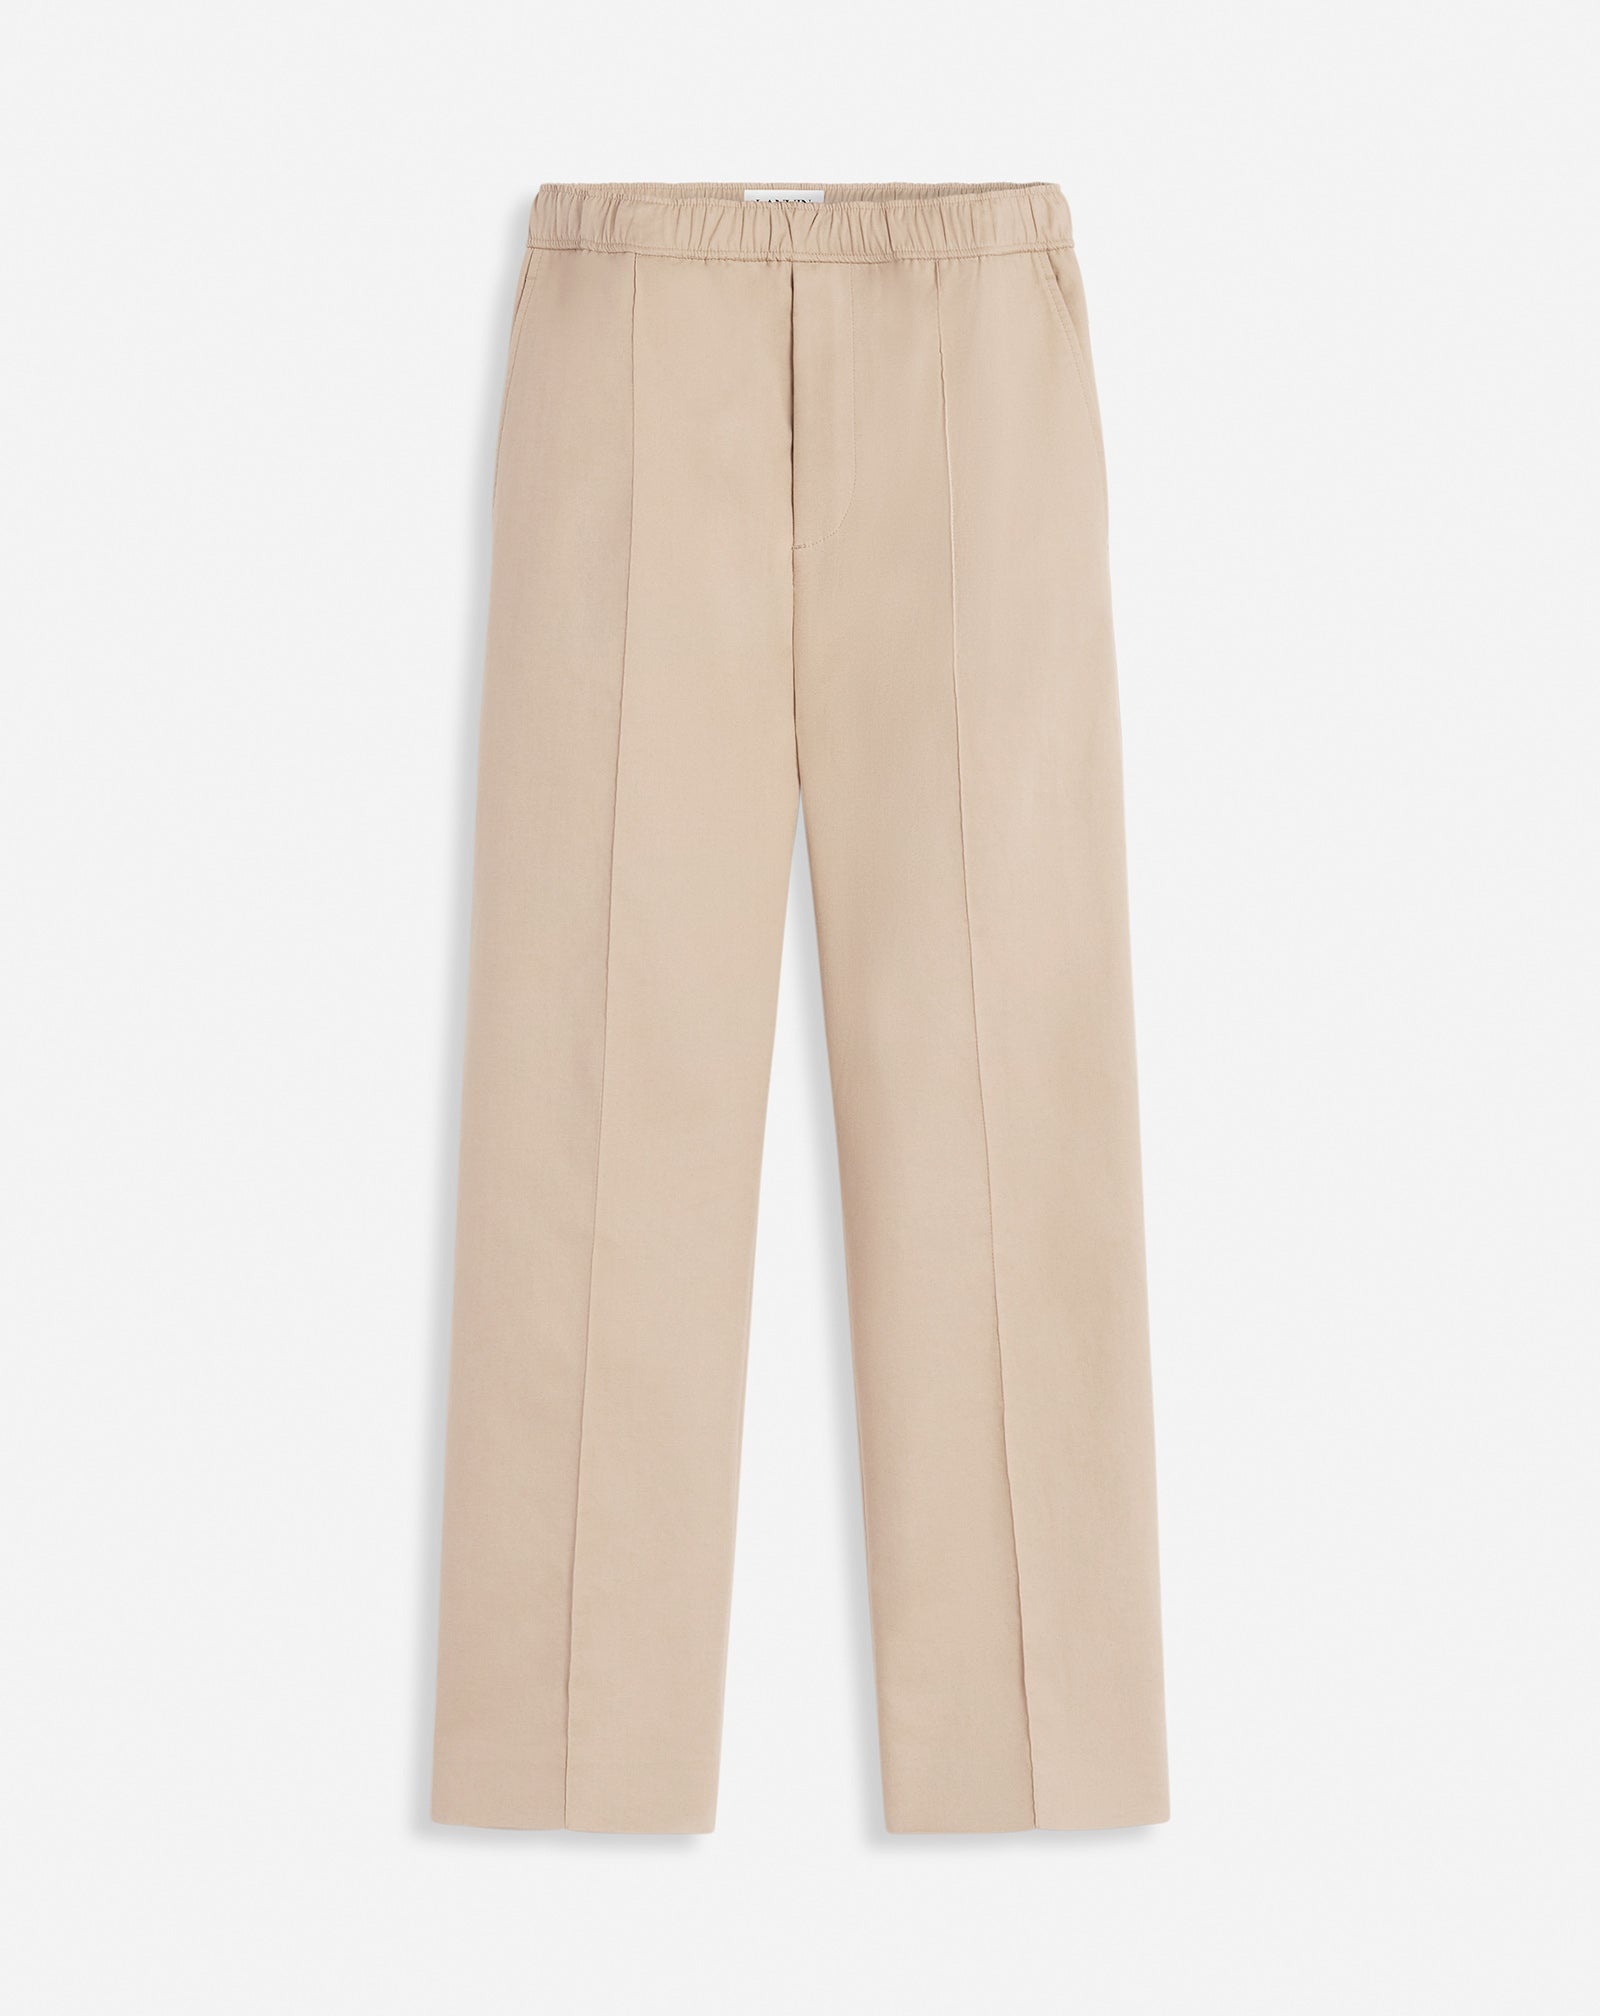 SUIT PANTS WITH AN ELASTICATED WAISTBAND - 1